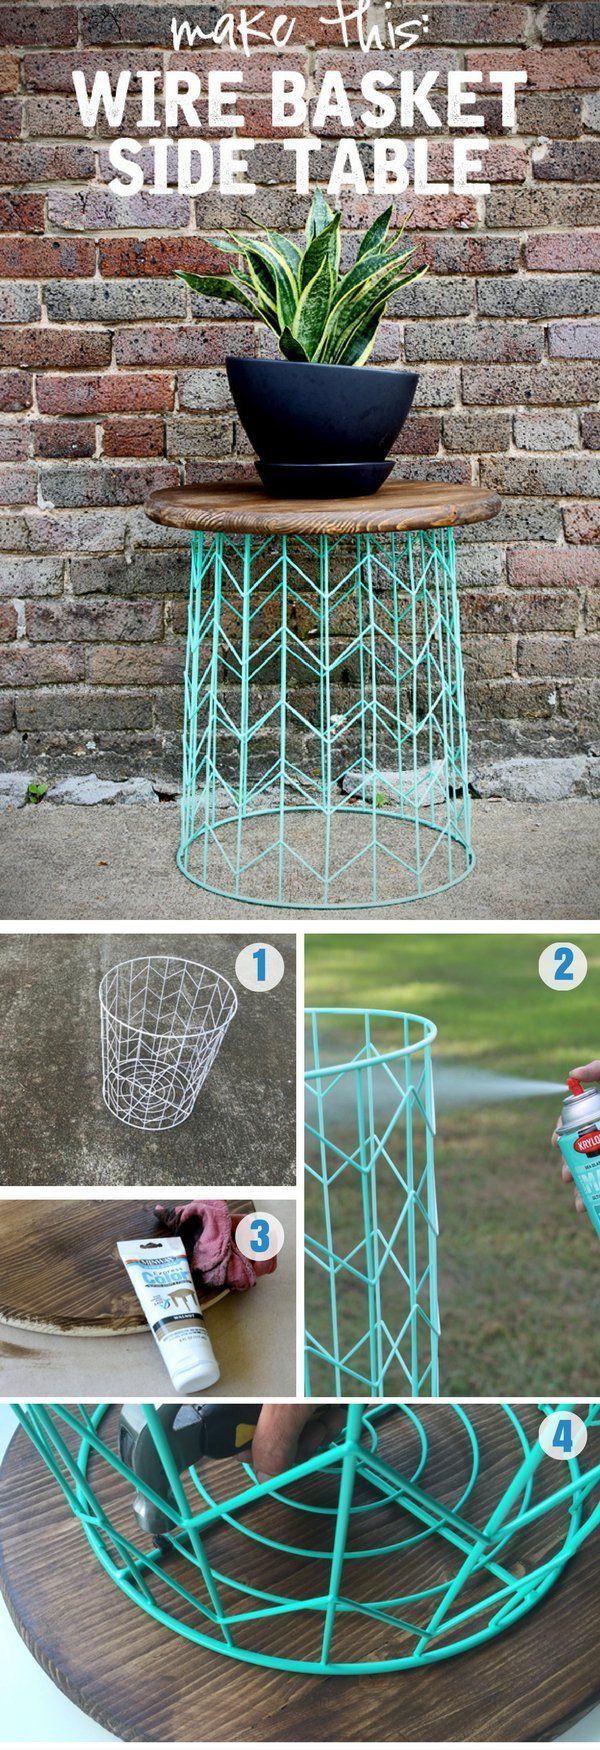 Love the idea for a simple DIY wire basket side table @istandarddesign